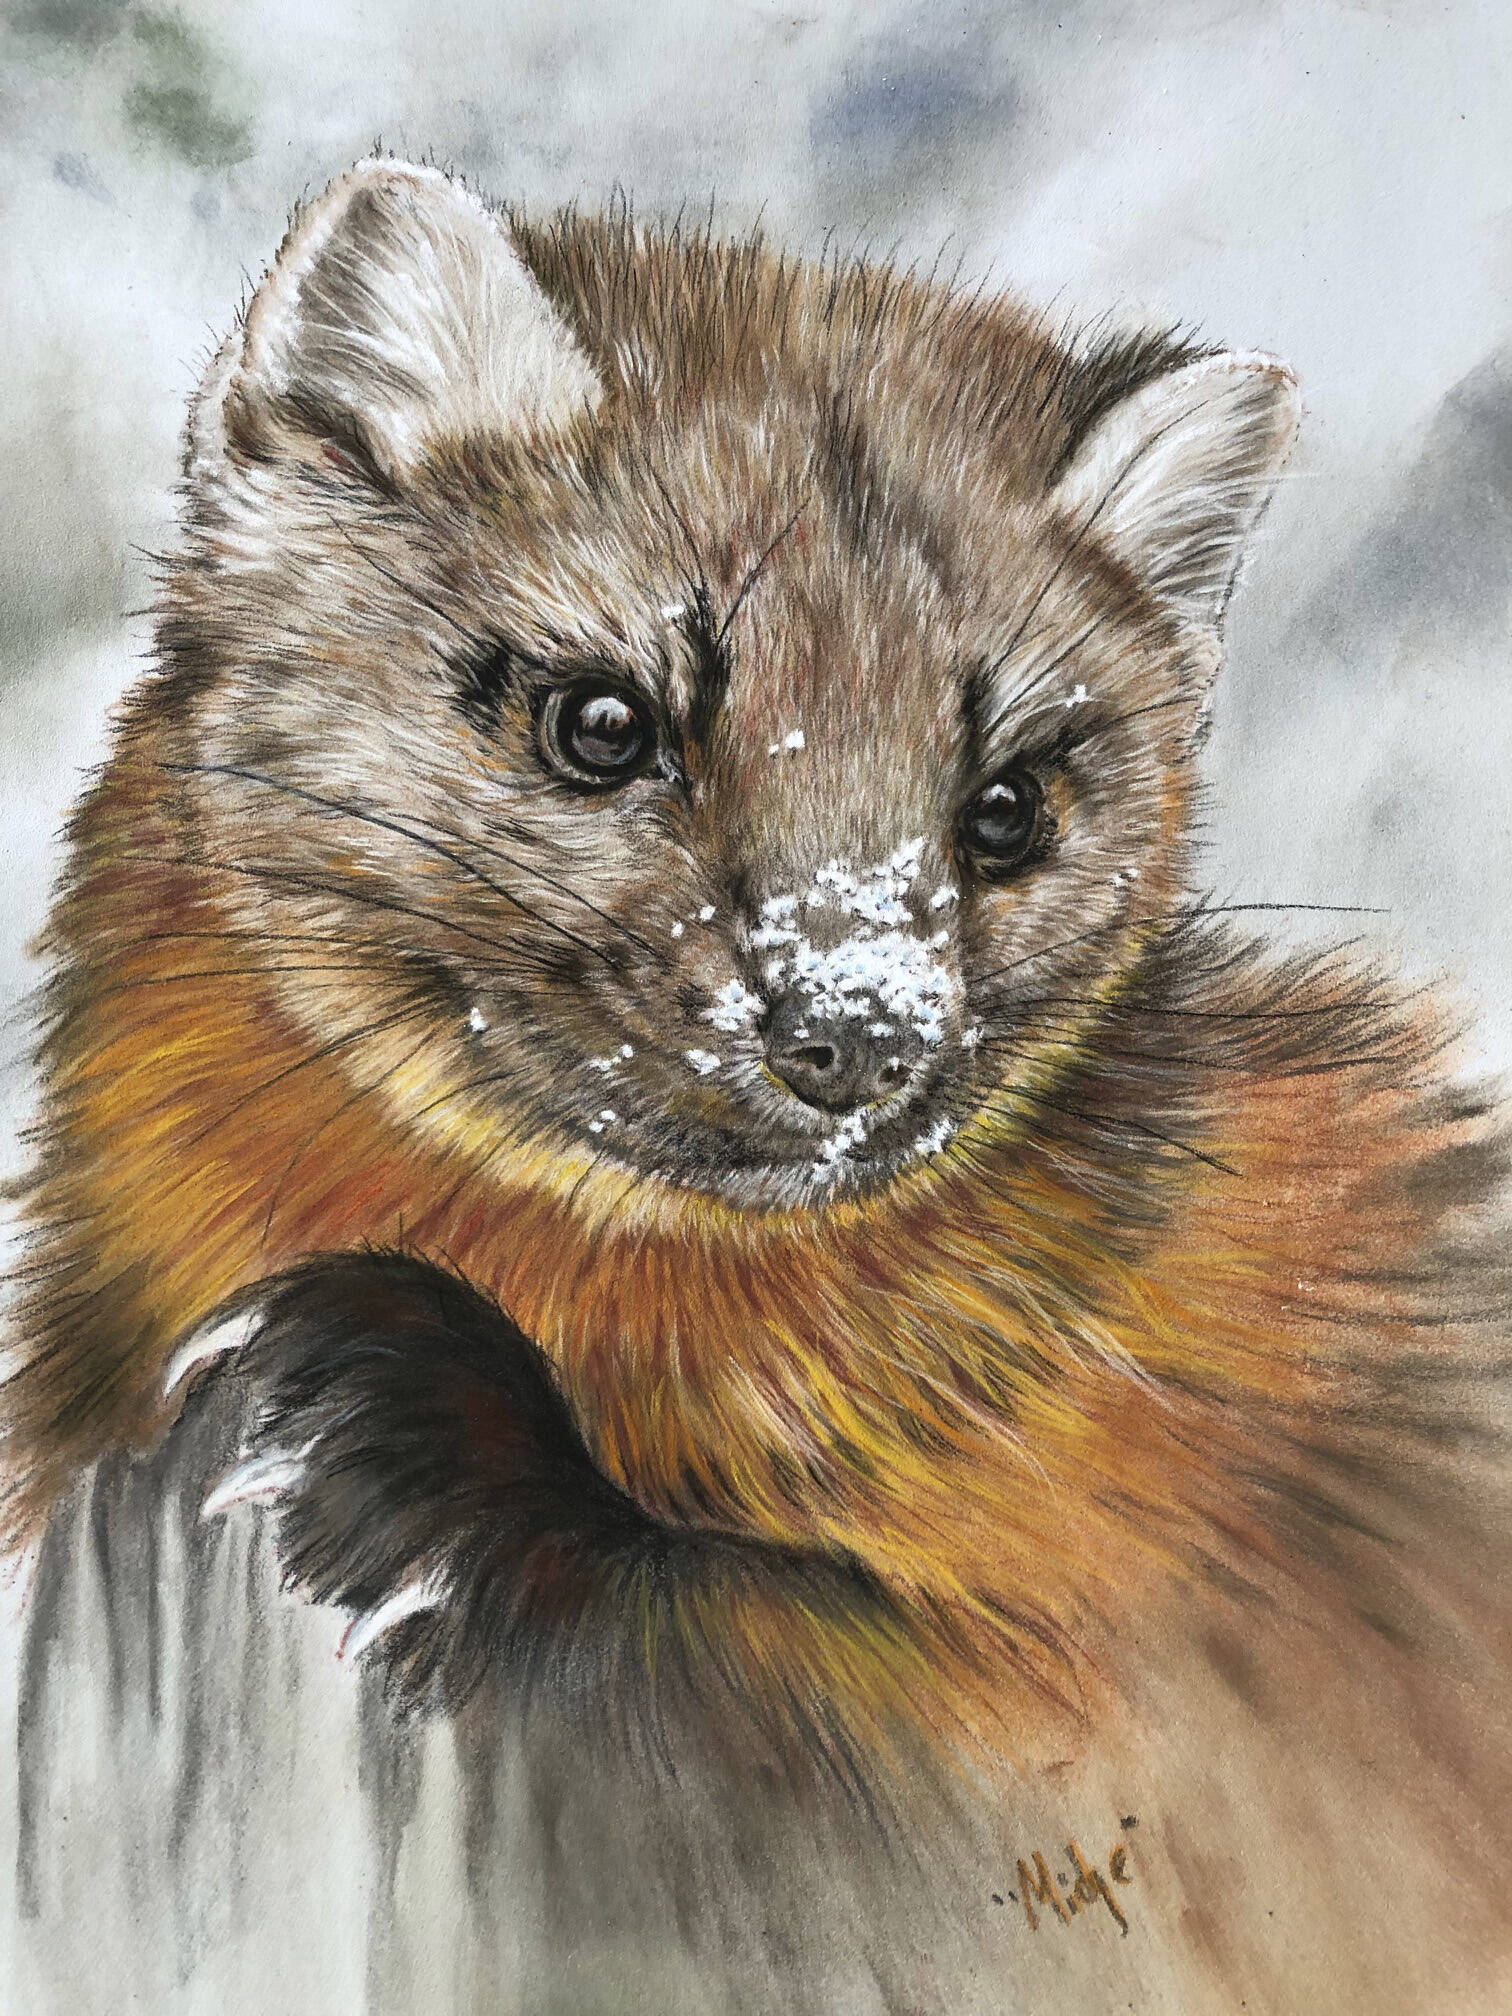 A pastel drawing from Turea M. “Midge” Grice’s show opening Friday, Aug. 5, 2022, at Fireweed Gallery in Homer, Alaska. (Photo provided)